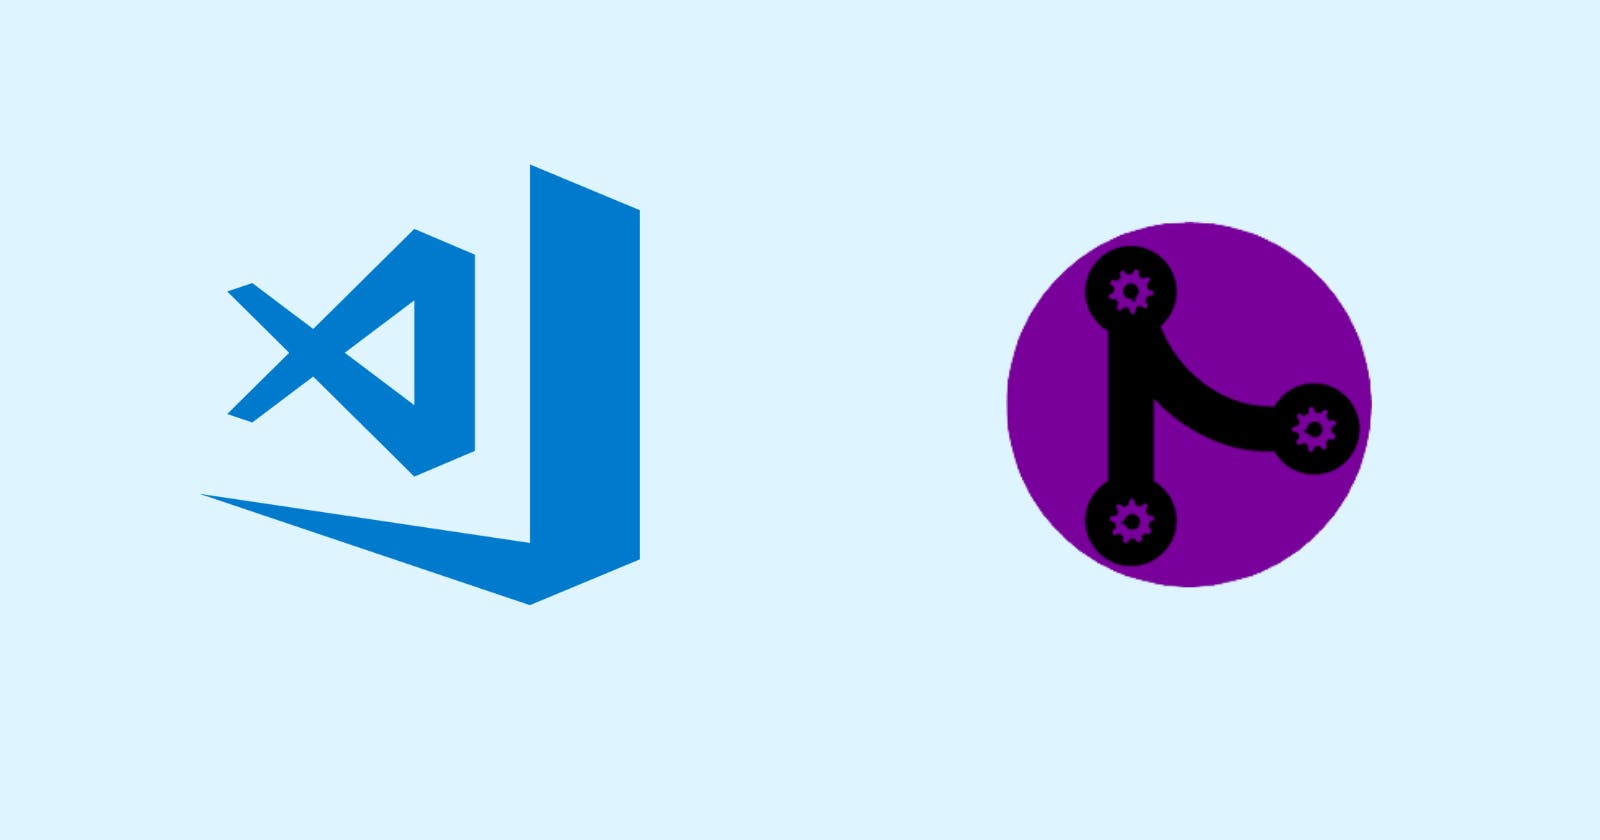 How to use VScode with multiple GitHub accounts